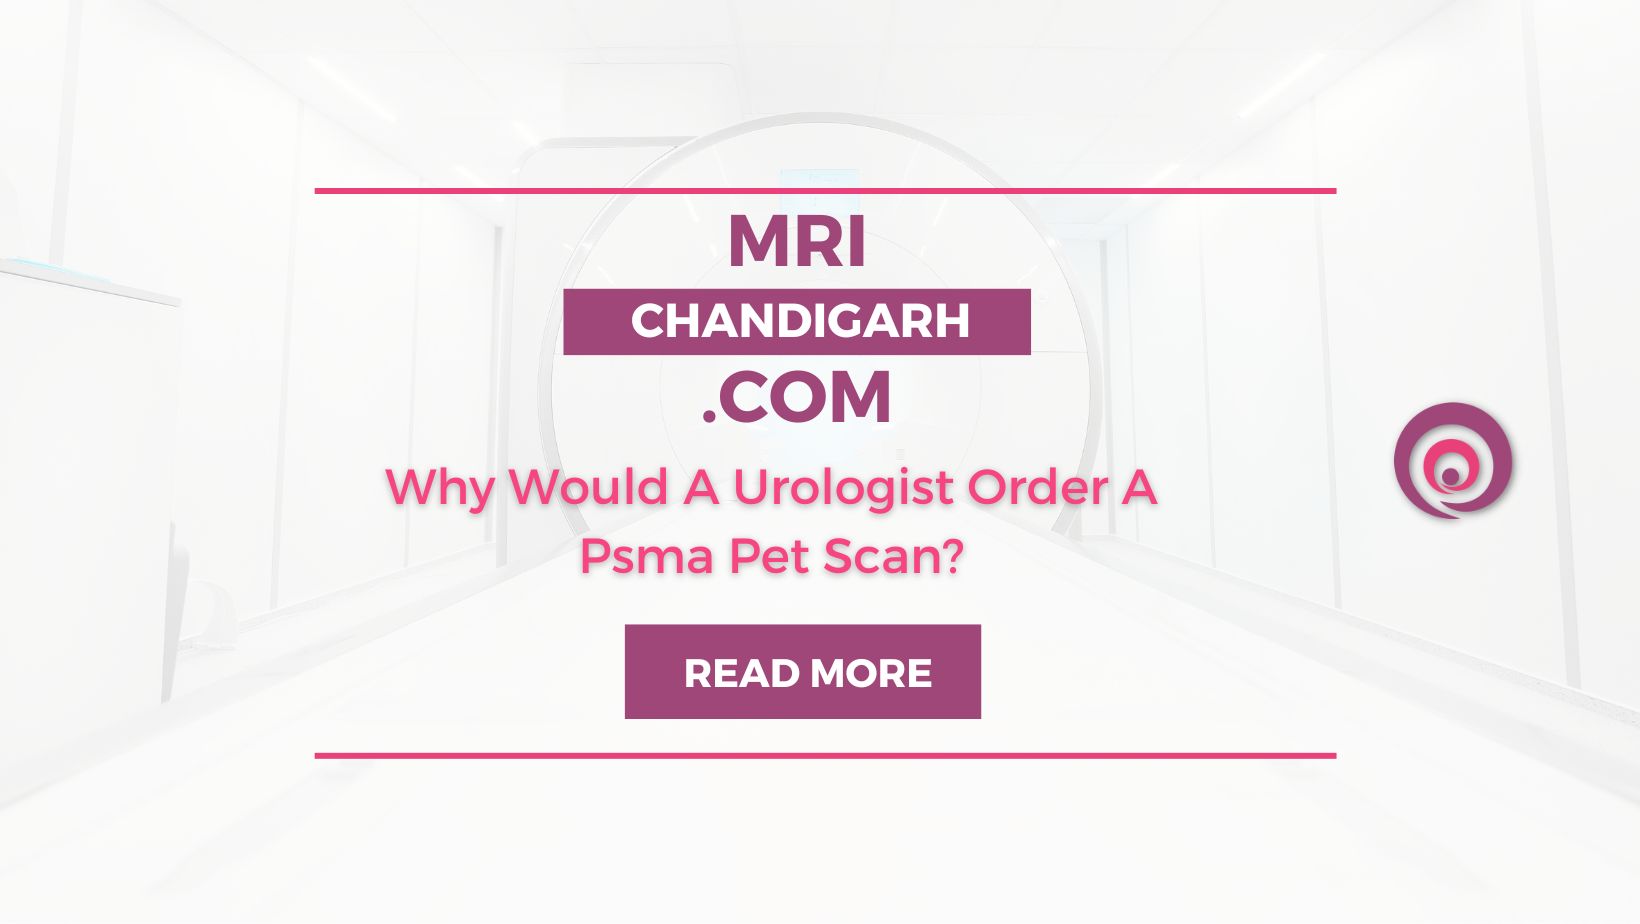 Why Would A Urologist Order A Psma Pet Scan?